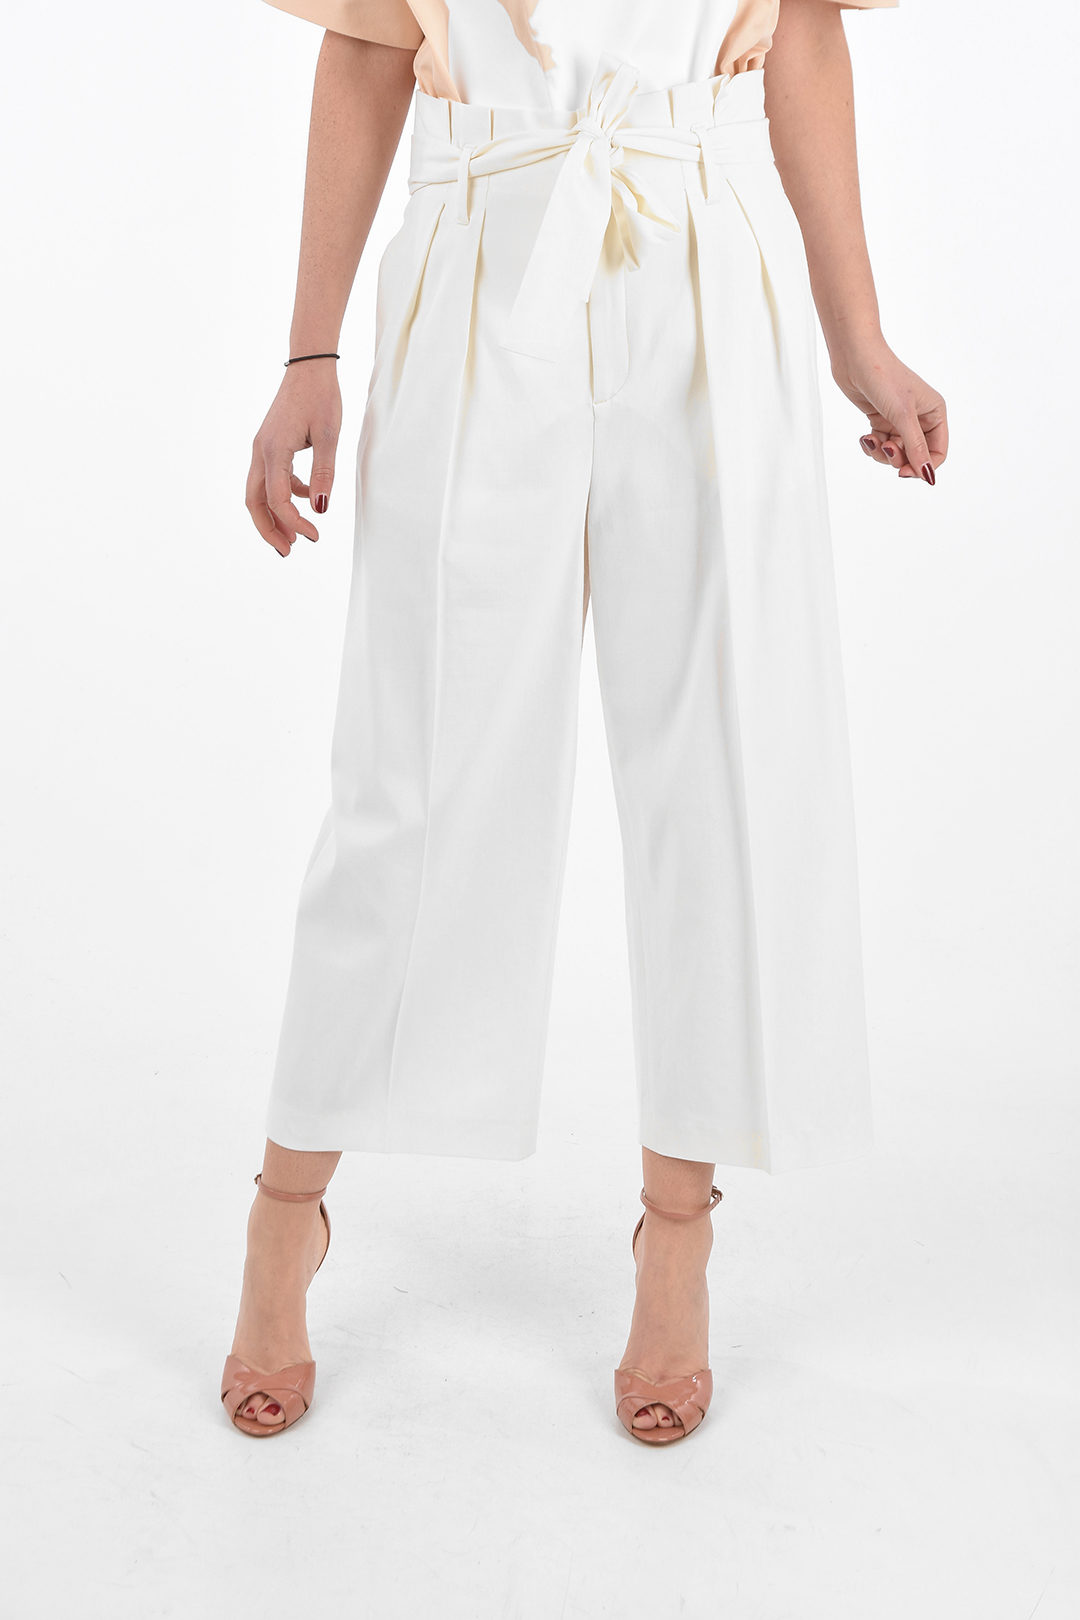 Red Valentino Double-pleated Gaucho Pants with Belt women - Glamood Outlet